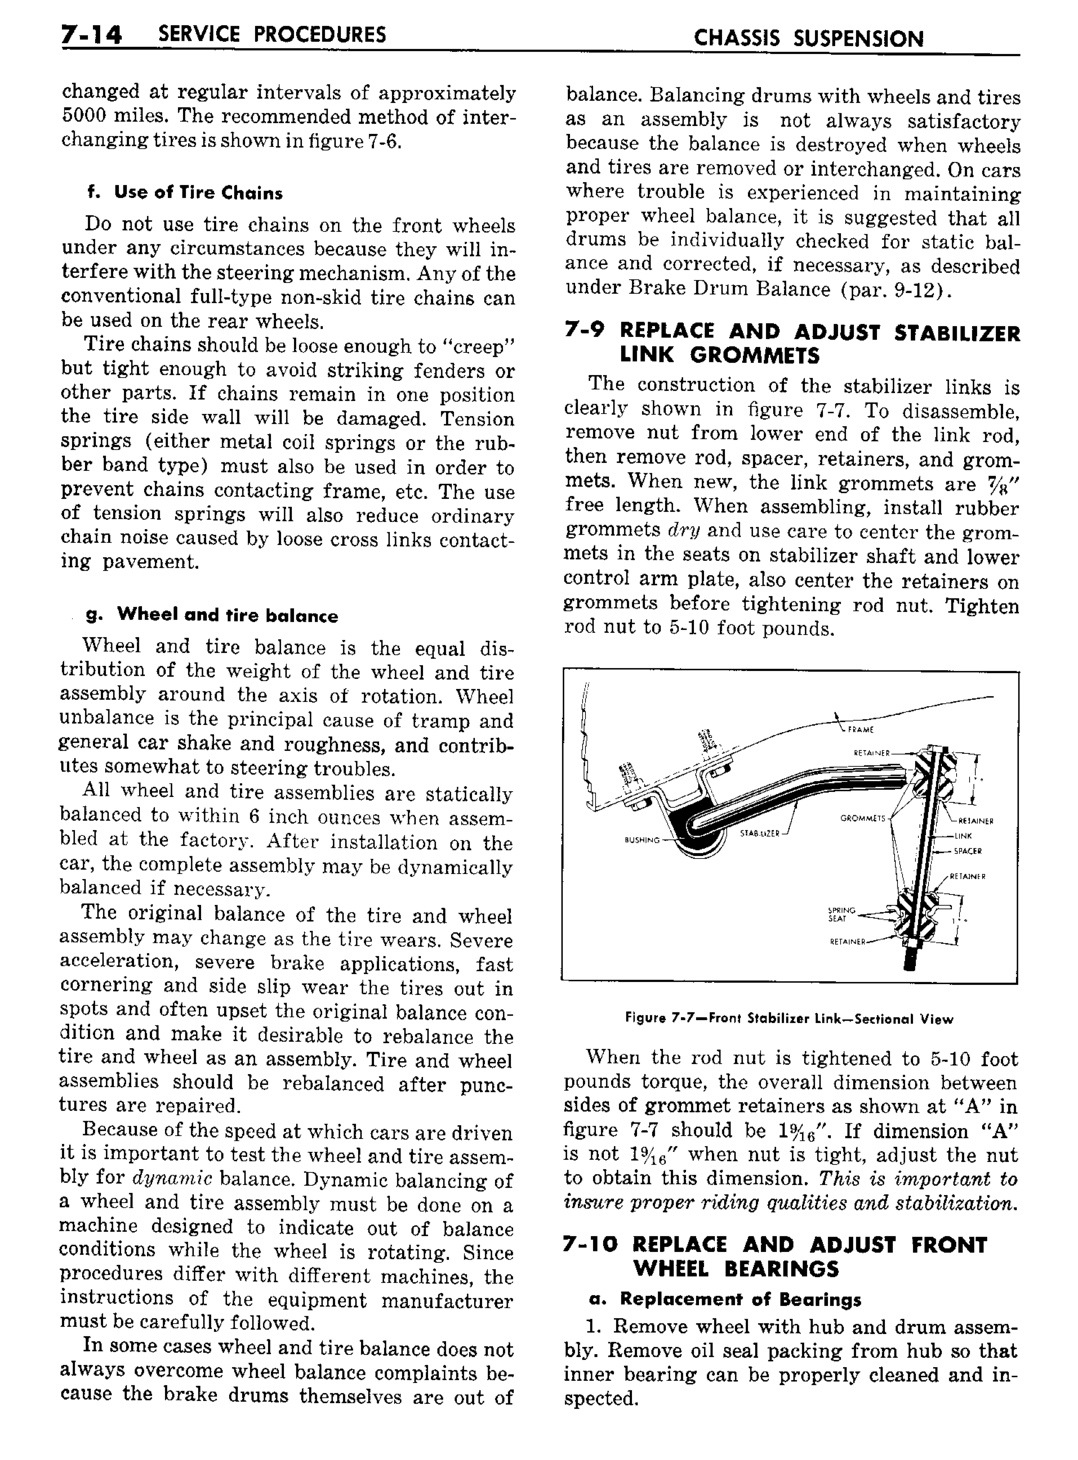 n_08 1960 Buick Shop Manual - Chassis Suspension-014-014.jpg